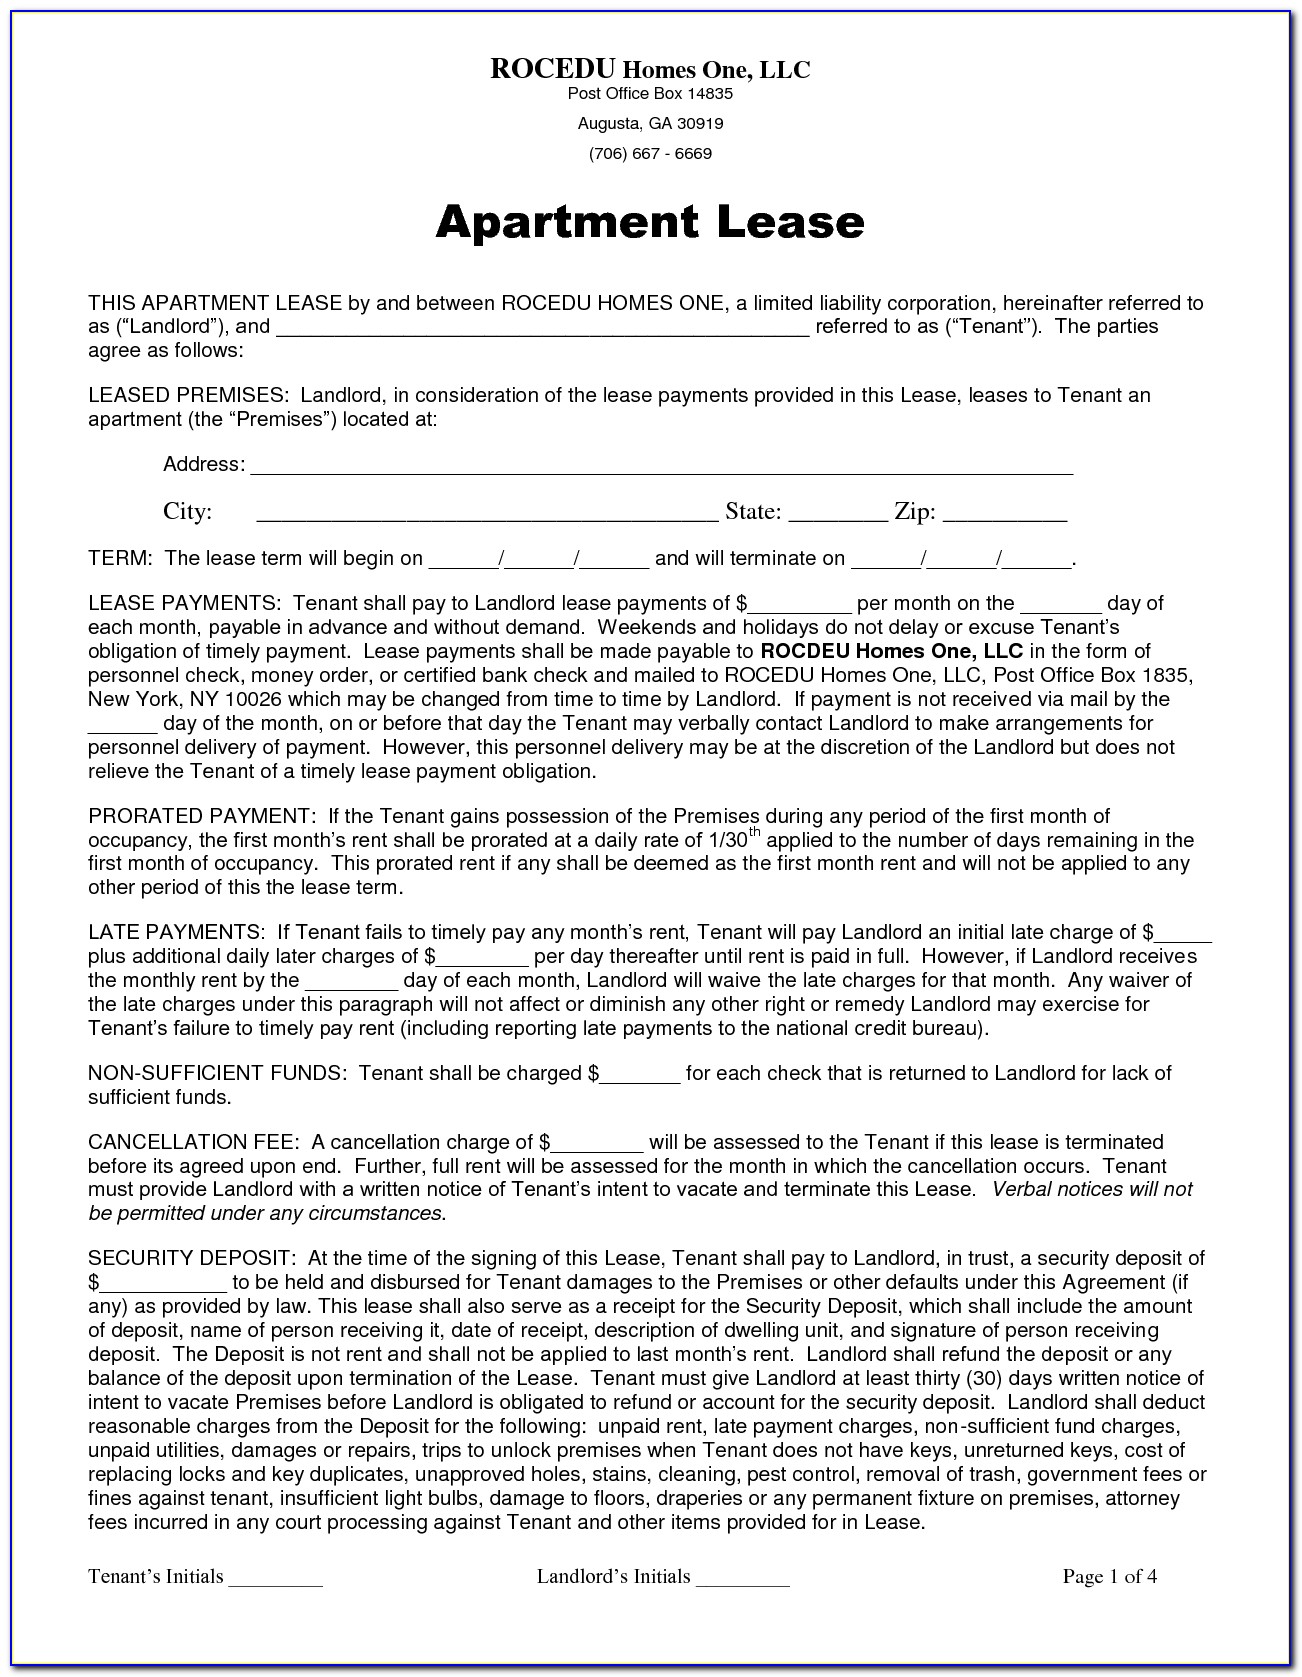 Apartments Lease Forms